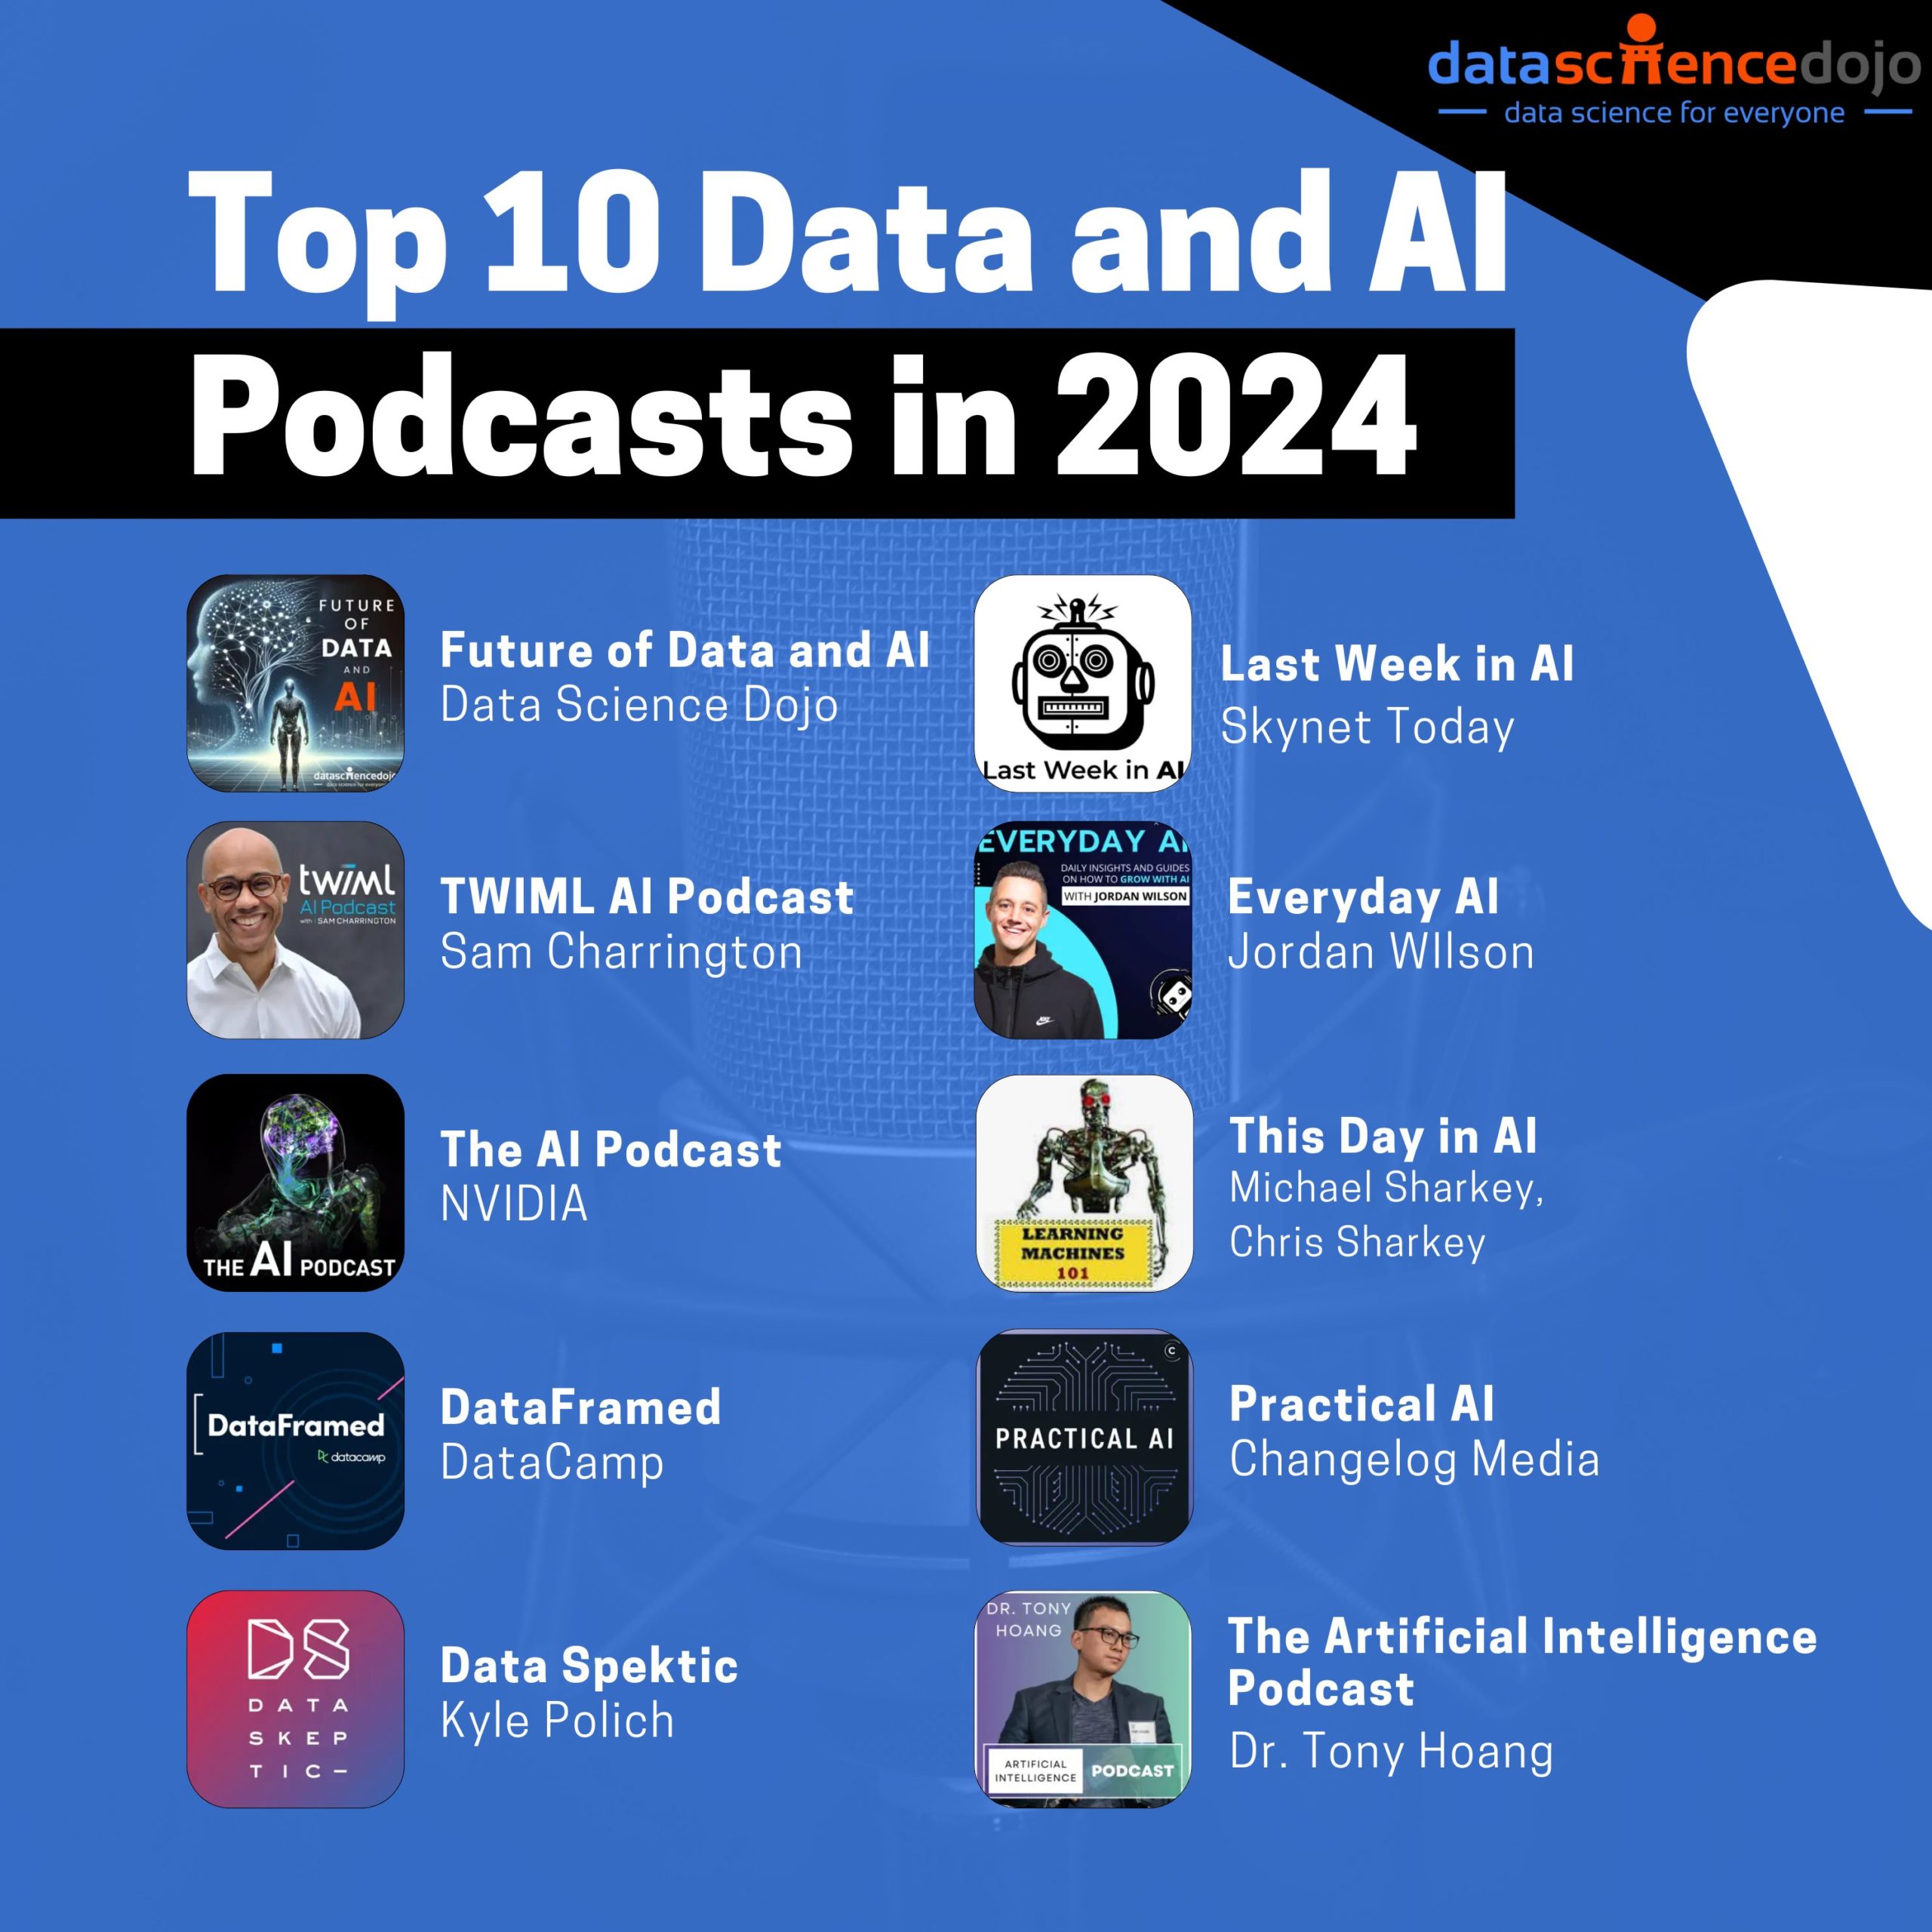 Top 10 Data and AI Podcasts 2024